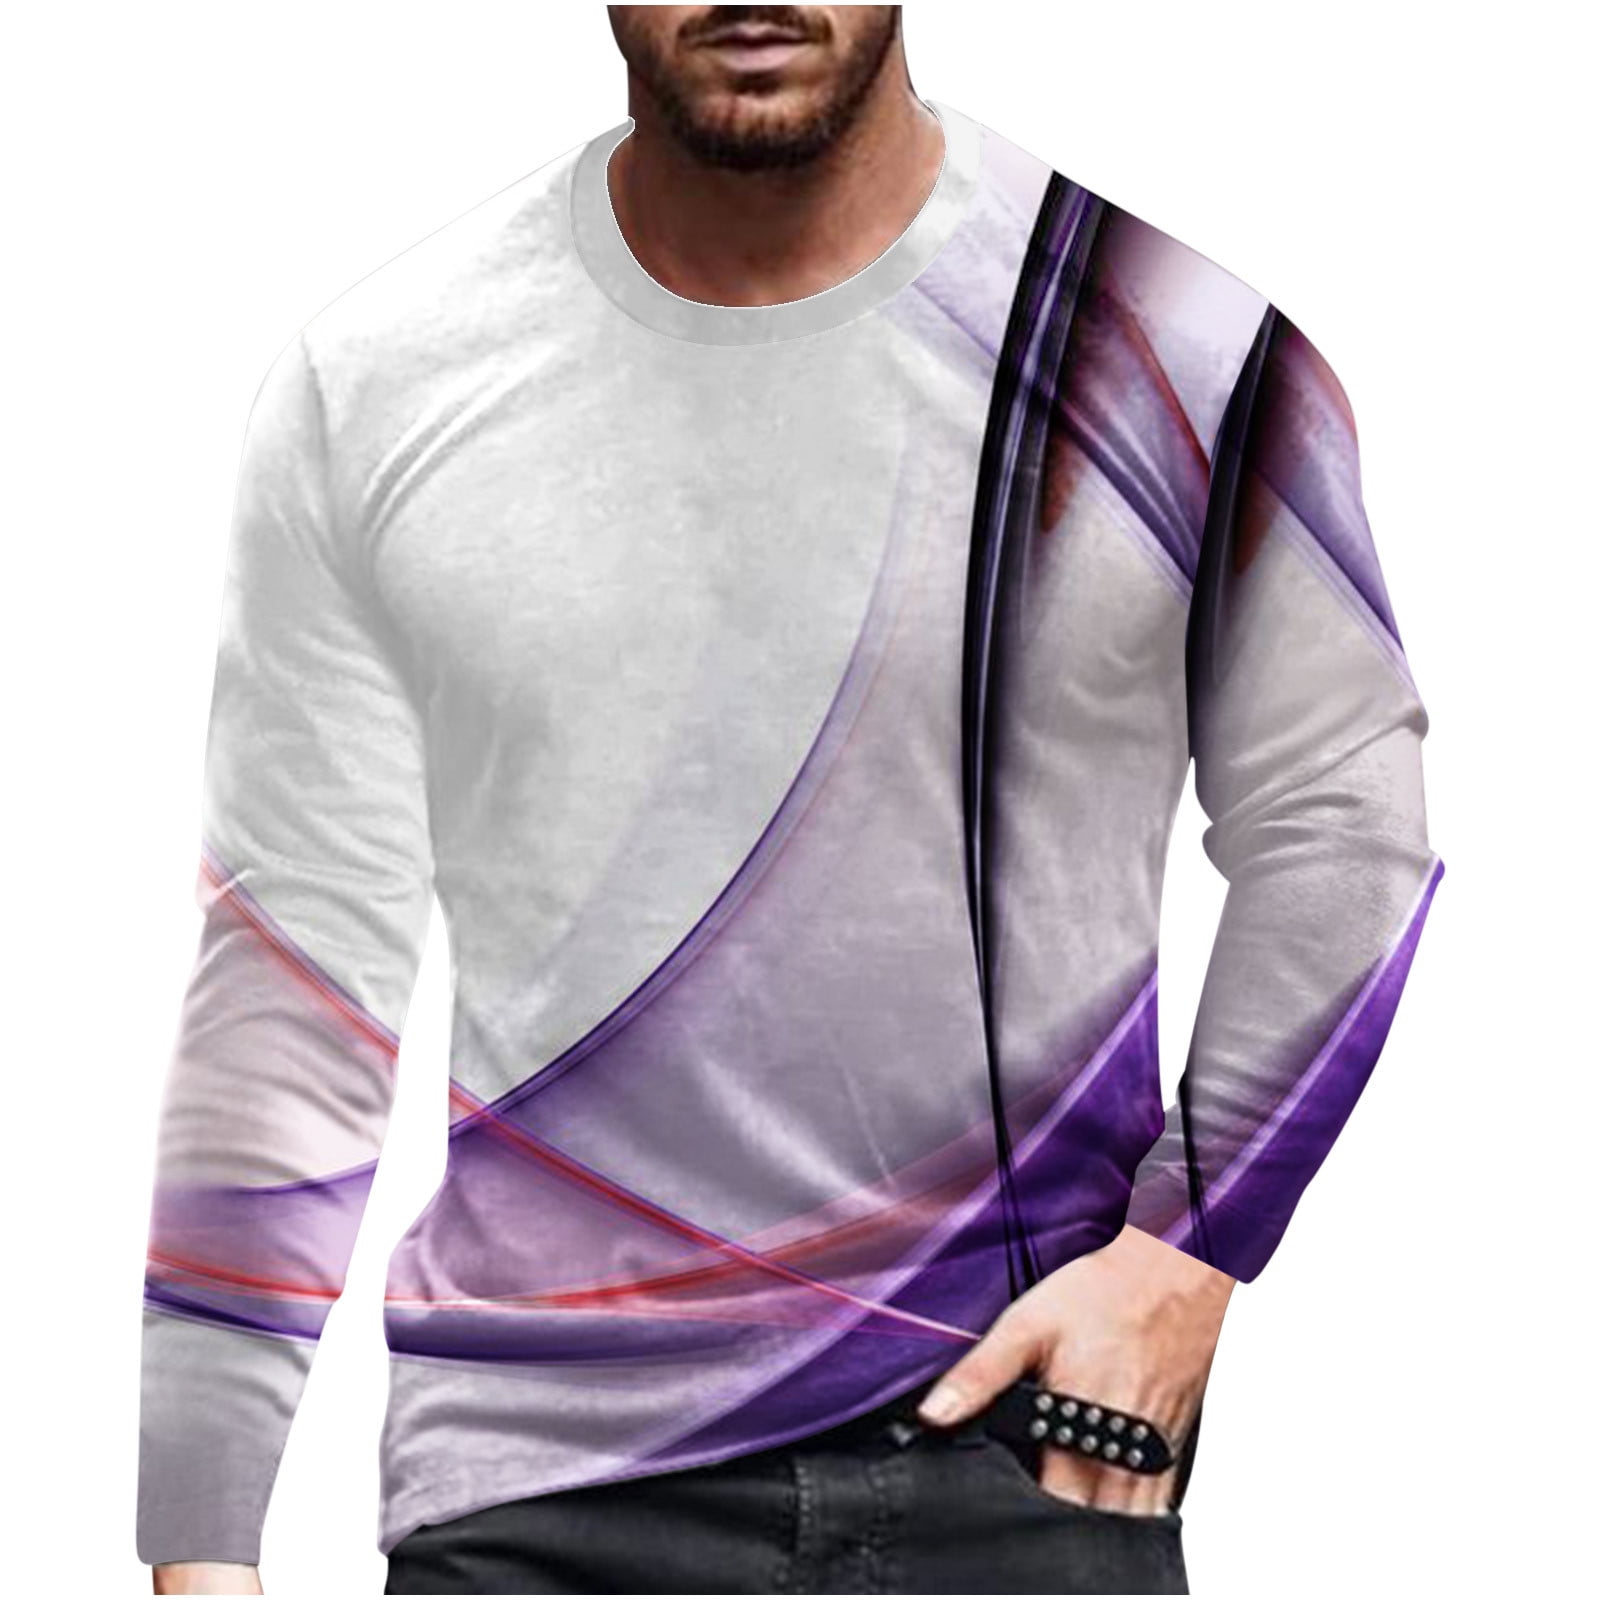 T Shirts for Men Graphic 2023,Fashion 3D Digital Printing Fitness Sports  Short Sleeve Tees Blouse Streetwear Tops